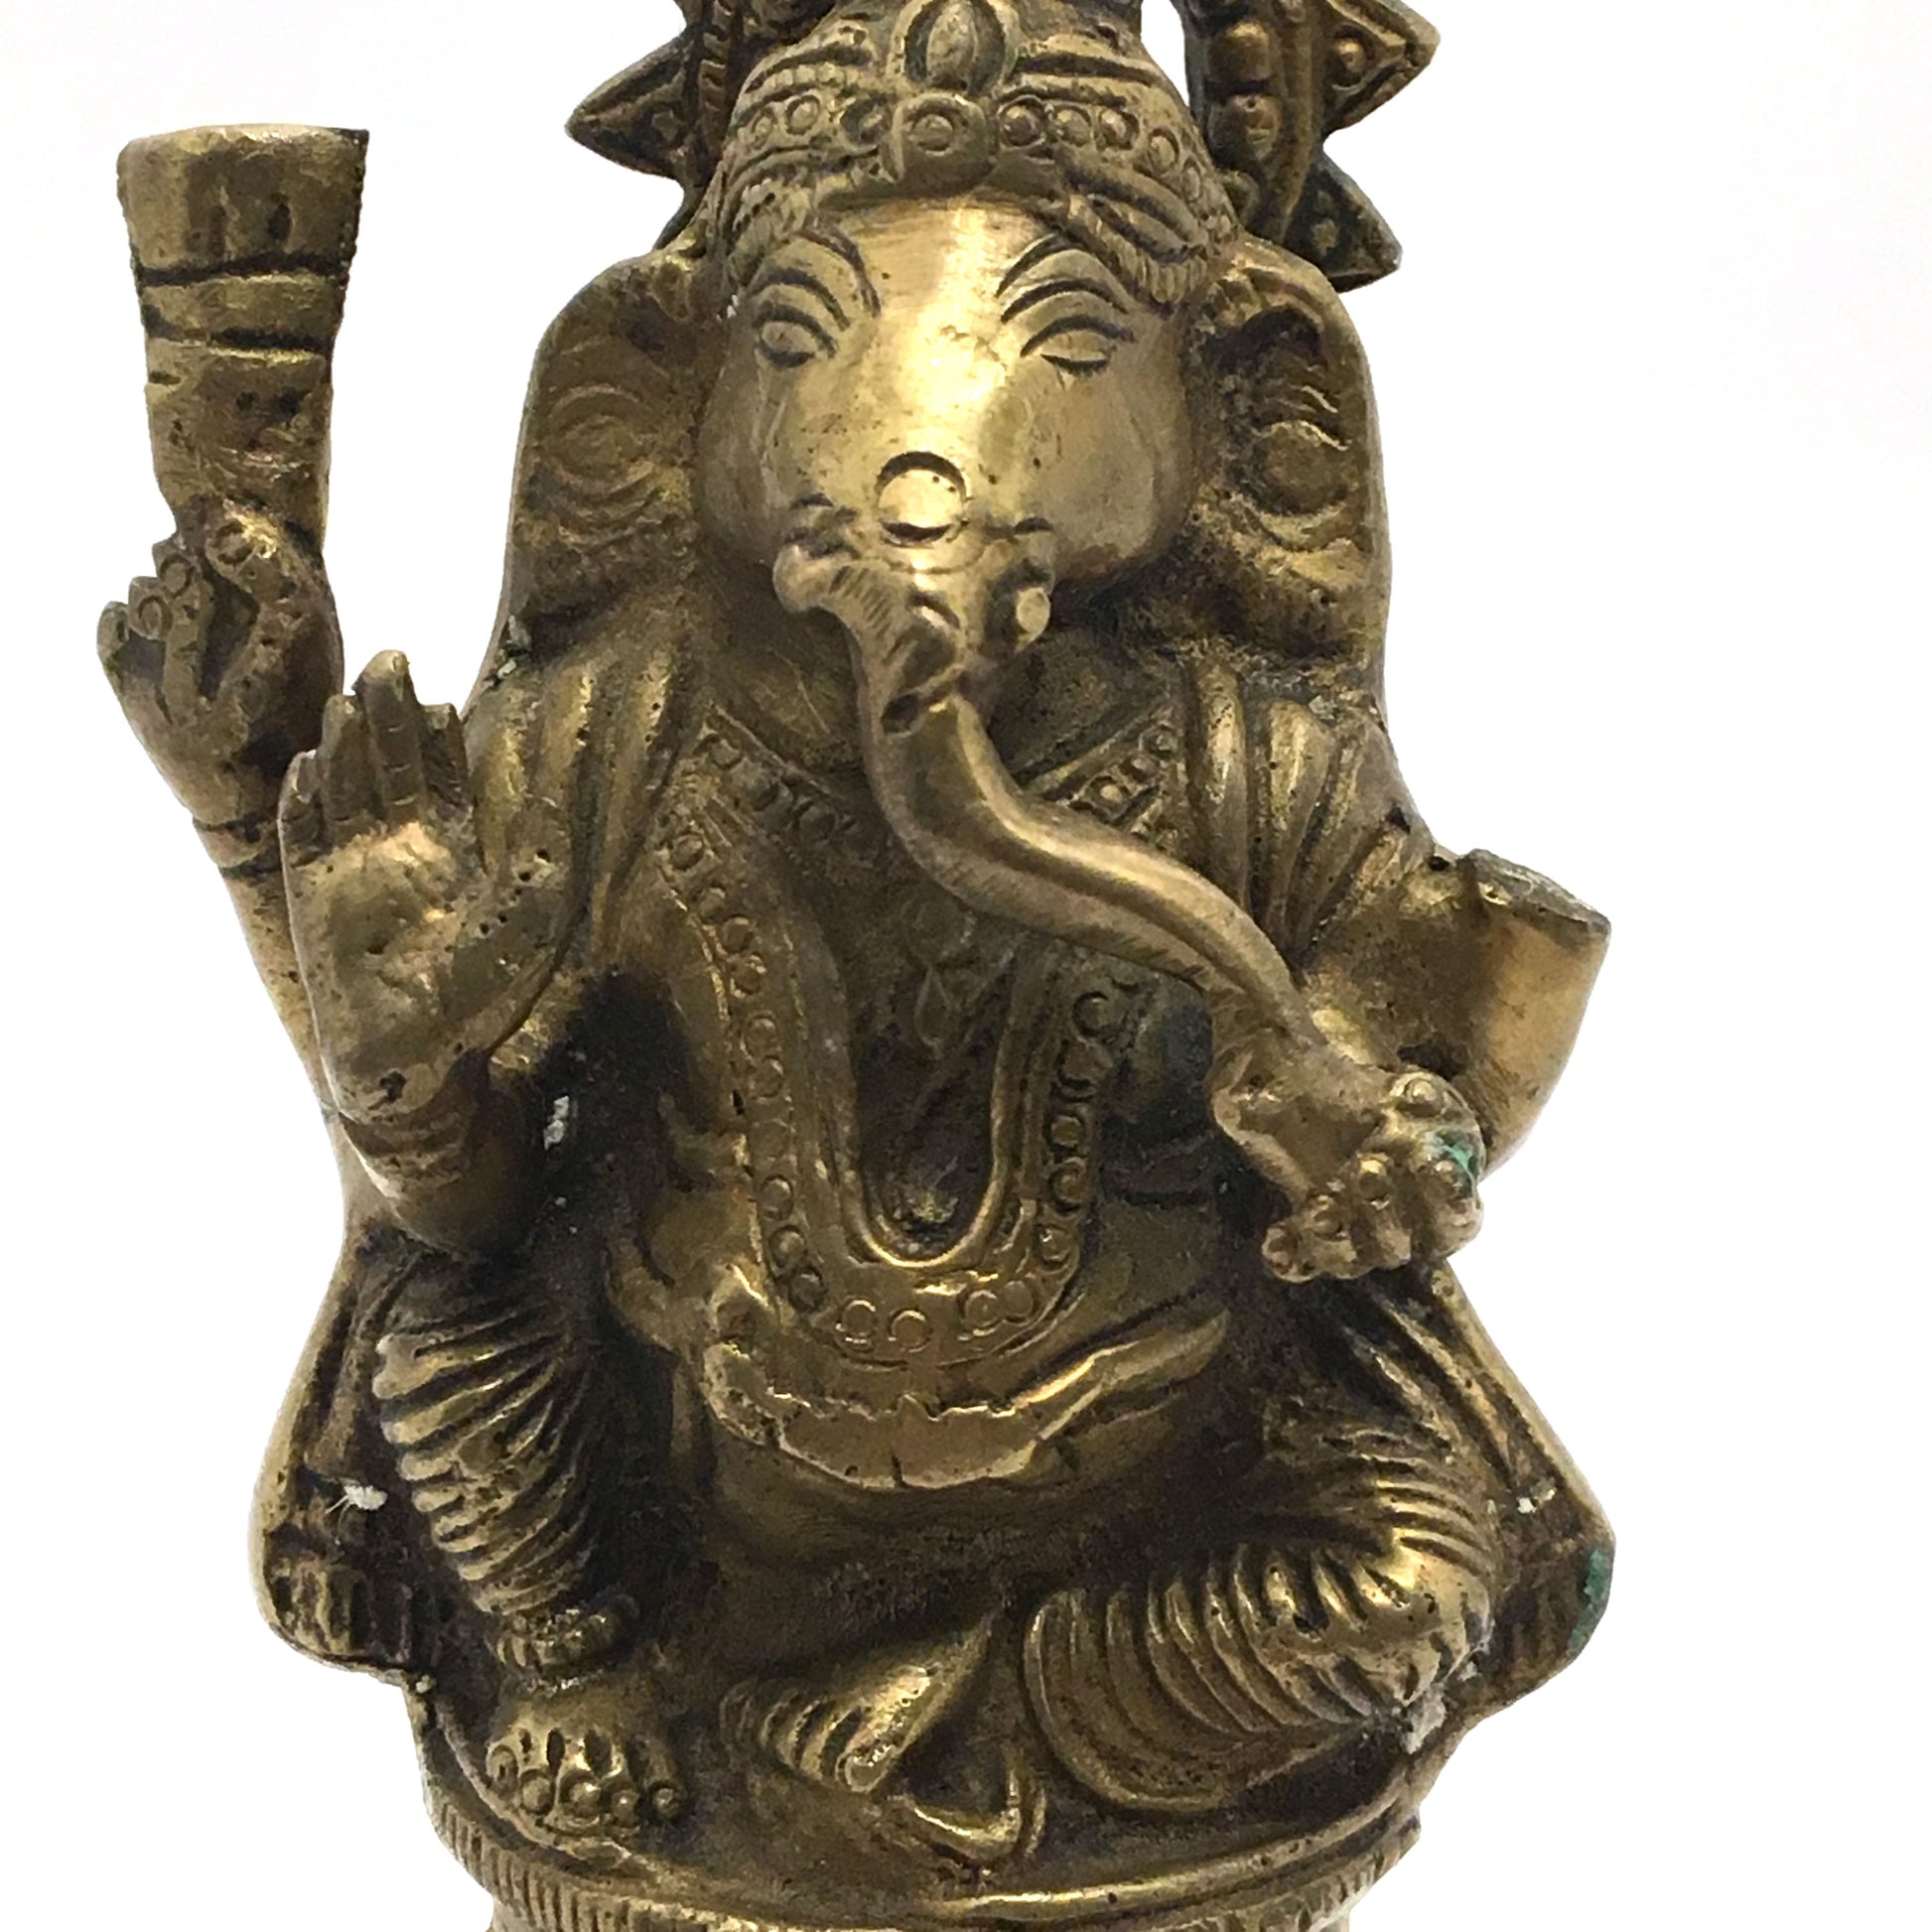 Handcrafted Brass Ganesh Ganapati India Elephant God Statue – Obstacle Remover 6 - Montecinos Ethnic